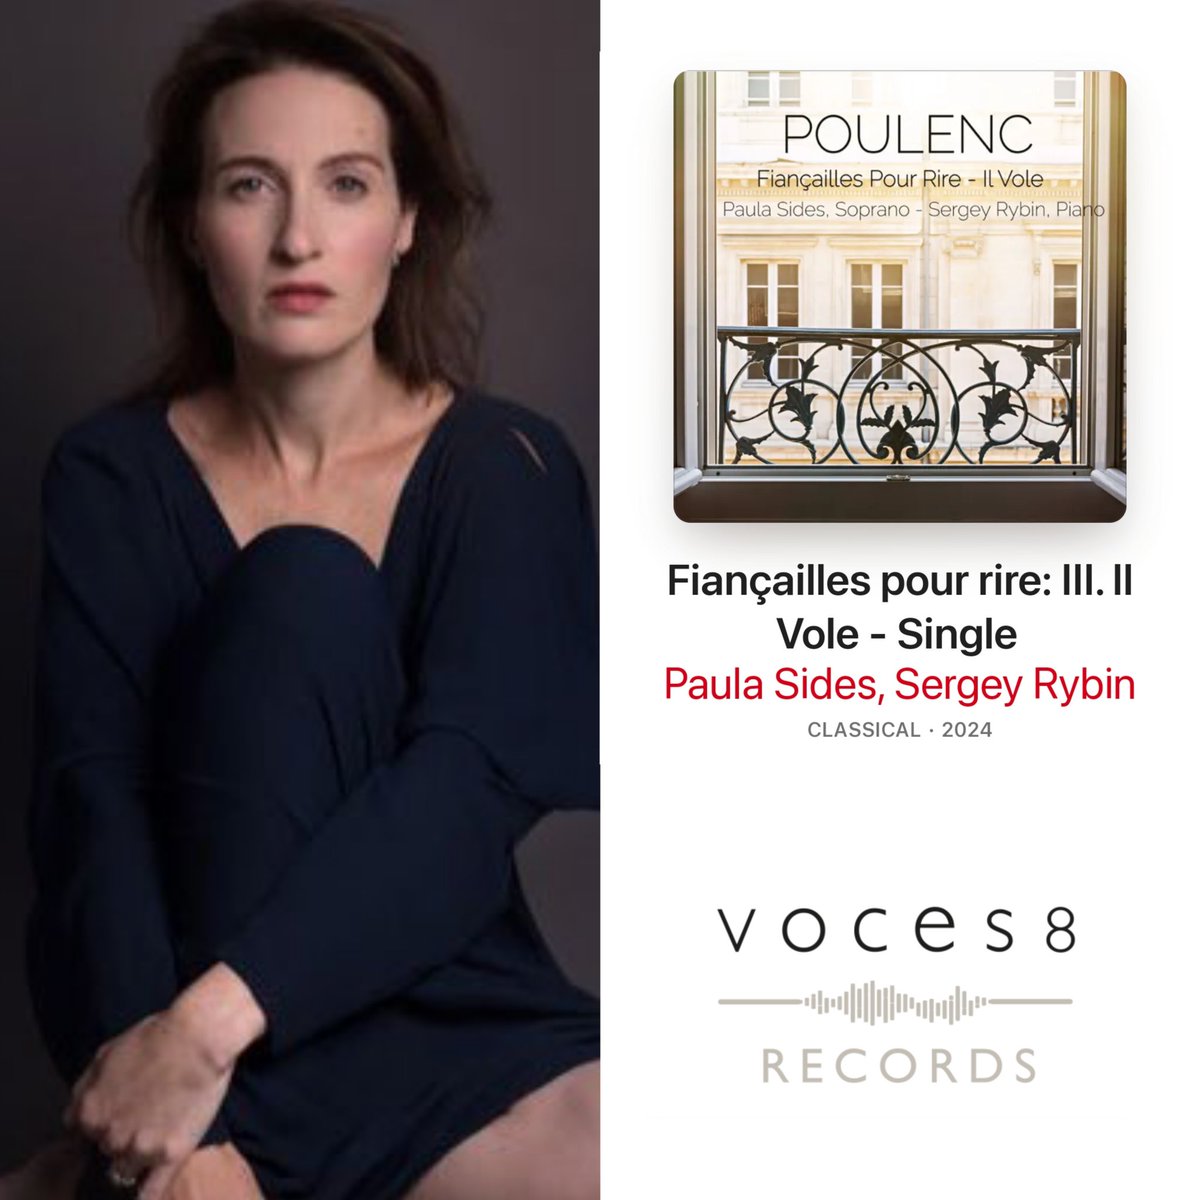 SINGLE RELEASED TODAY! We're really excited for the release on @AppleMusic of 'Il vole' from Poulenc's 'Fiançailles pour rire', a single from soprano @sidesp1 upcoming album on voces8records @v8_foundation with pianist #SergeyRybin